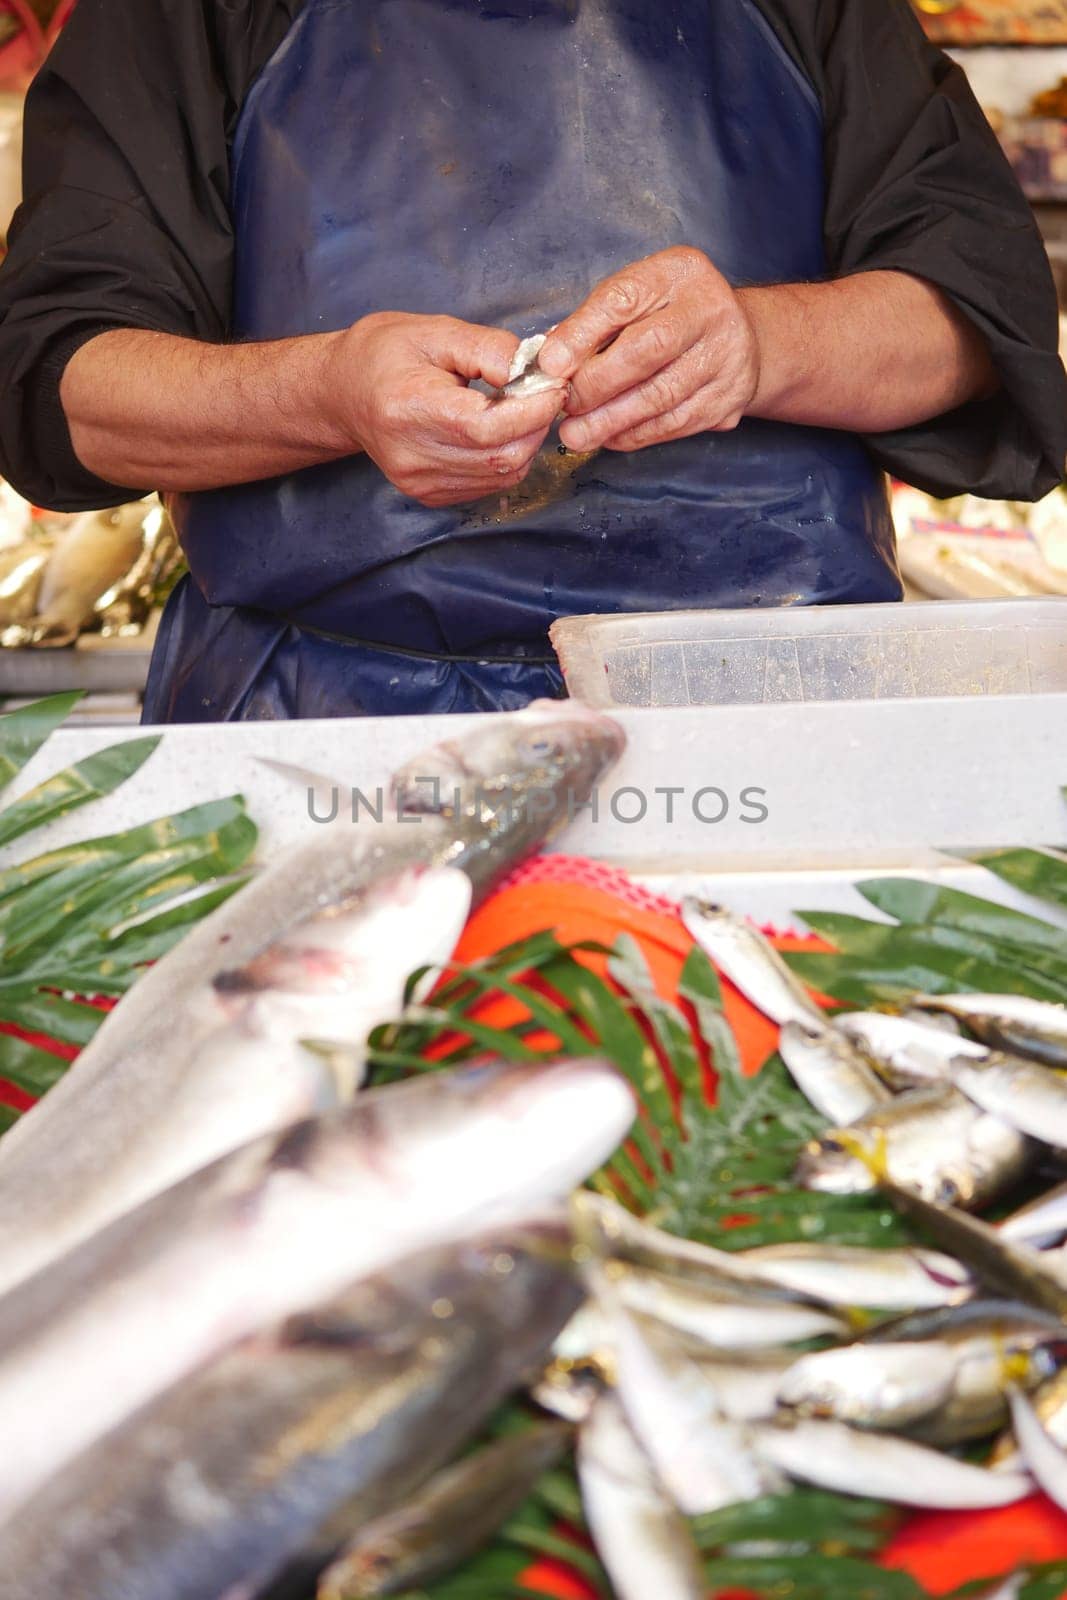 Cleaning fish for further cooking,